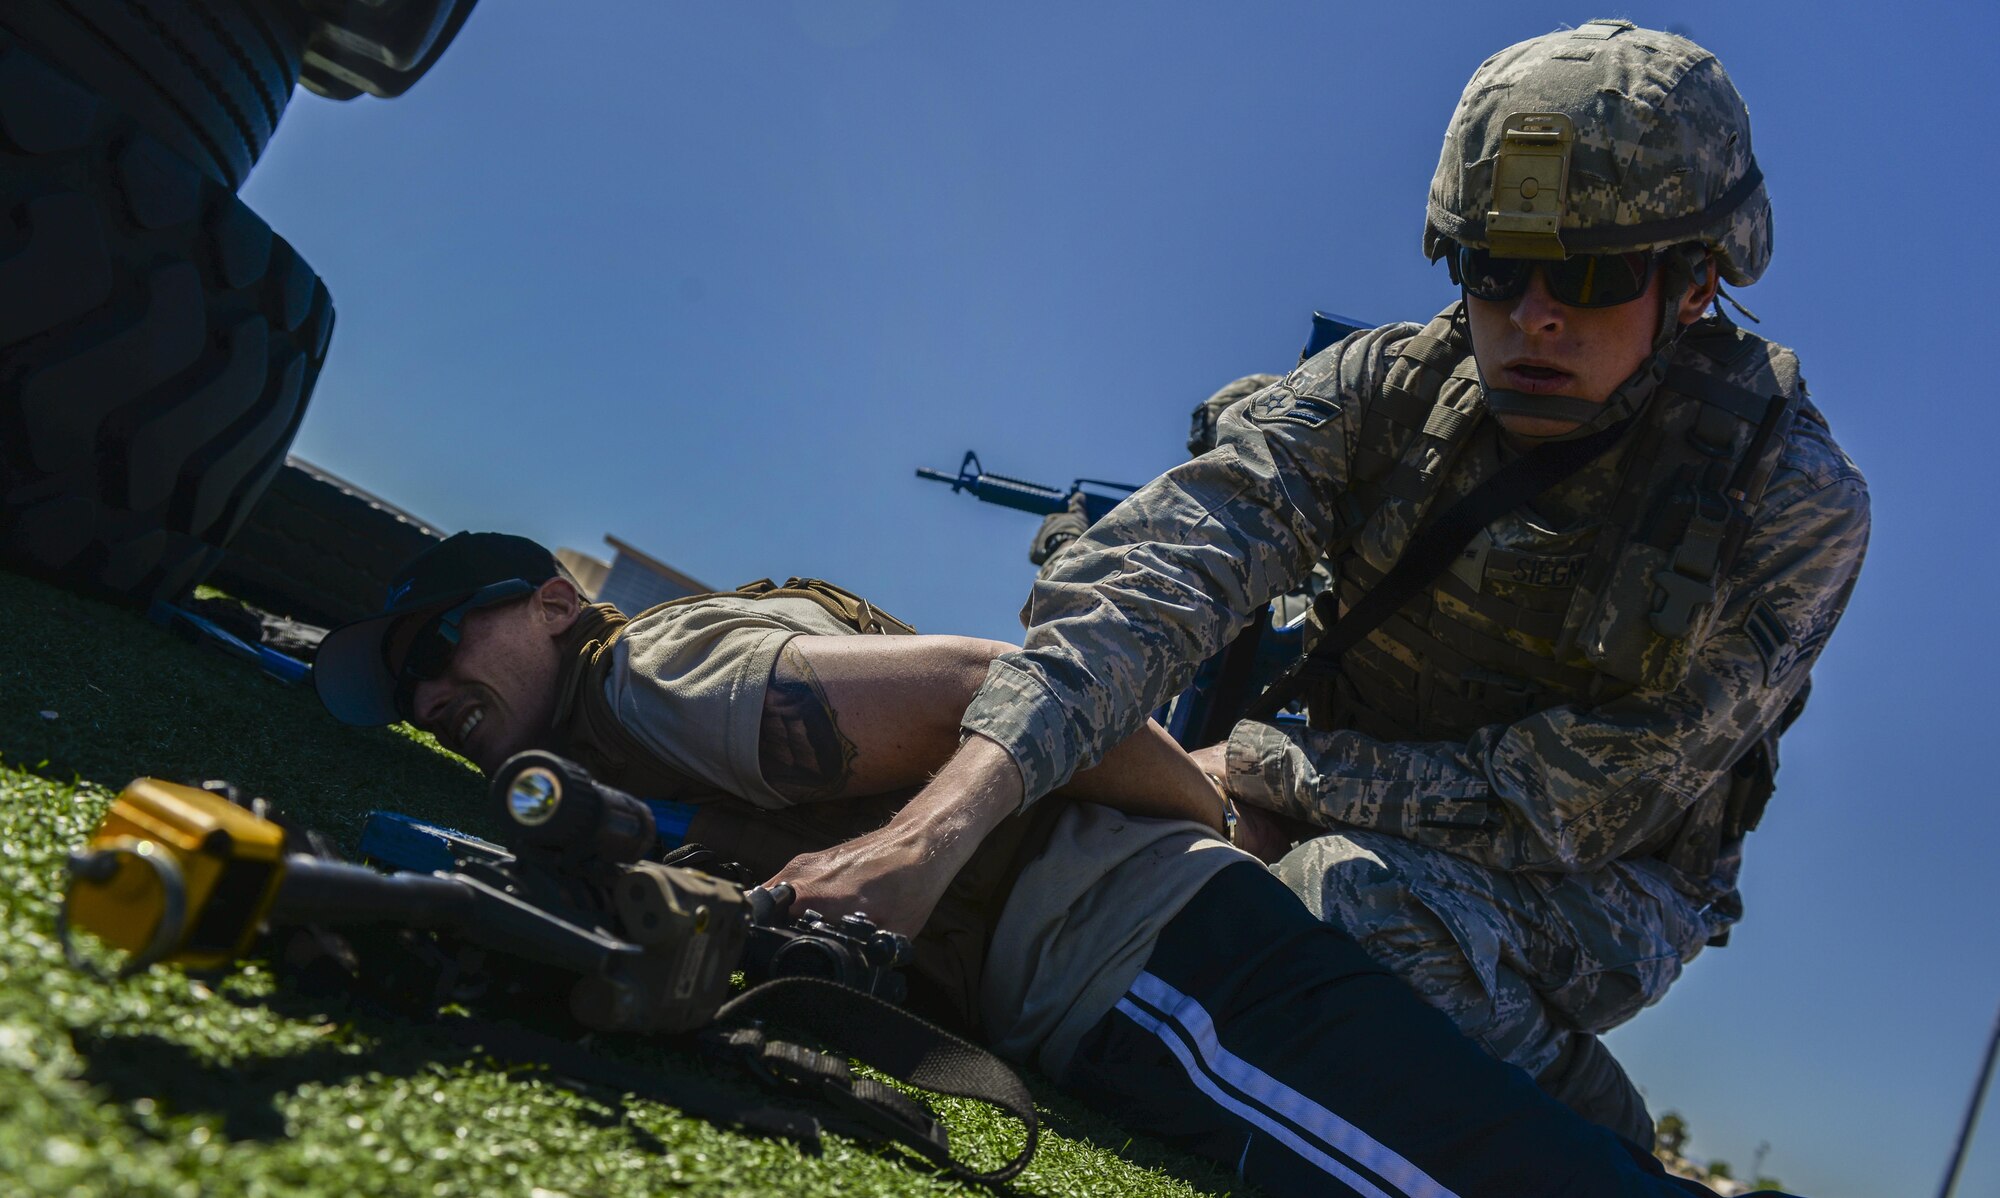 Airman 1st Class Robert Siegmann, 99th Security Forces Squadron, secured a simulated active shooter’s weapons after subduing the suspect during a base exercise at Nellis Air Force Base, Nev., May 12, 2016. The exercise tested the readiness and procedures of the base with different sets of scenarios and challenges with May 12 serving as the pinnacle of the exercise as it simulated a multi-location large scale attack. (U.S. Air Force photo by Airman 1st Class Kevin Tanenbaum)